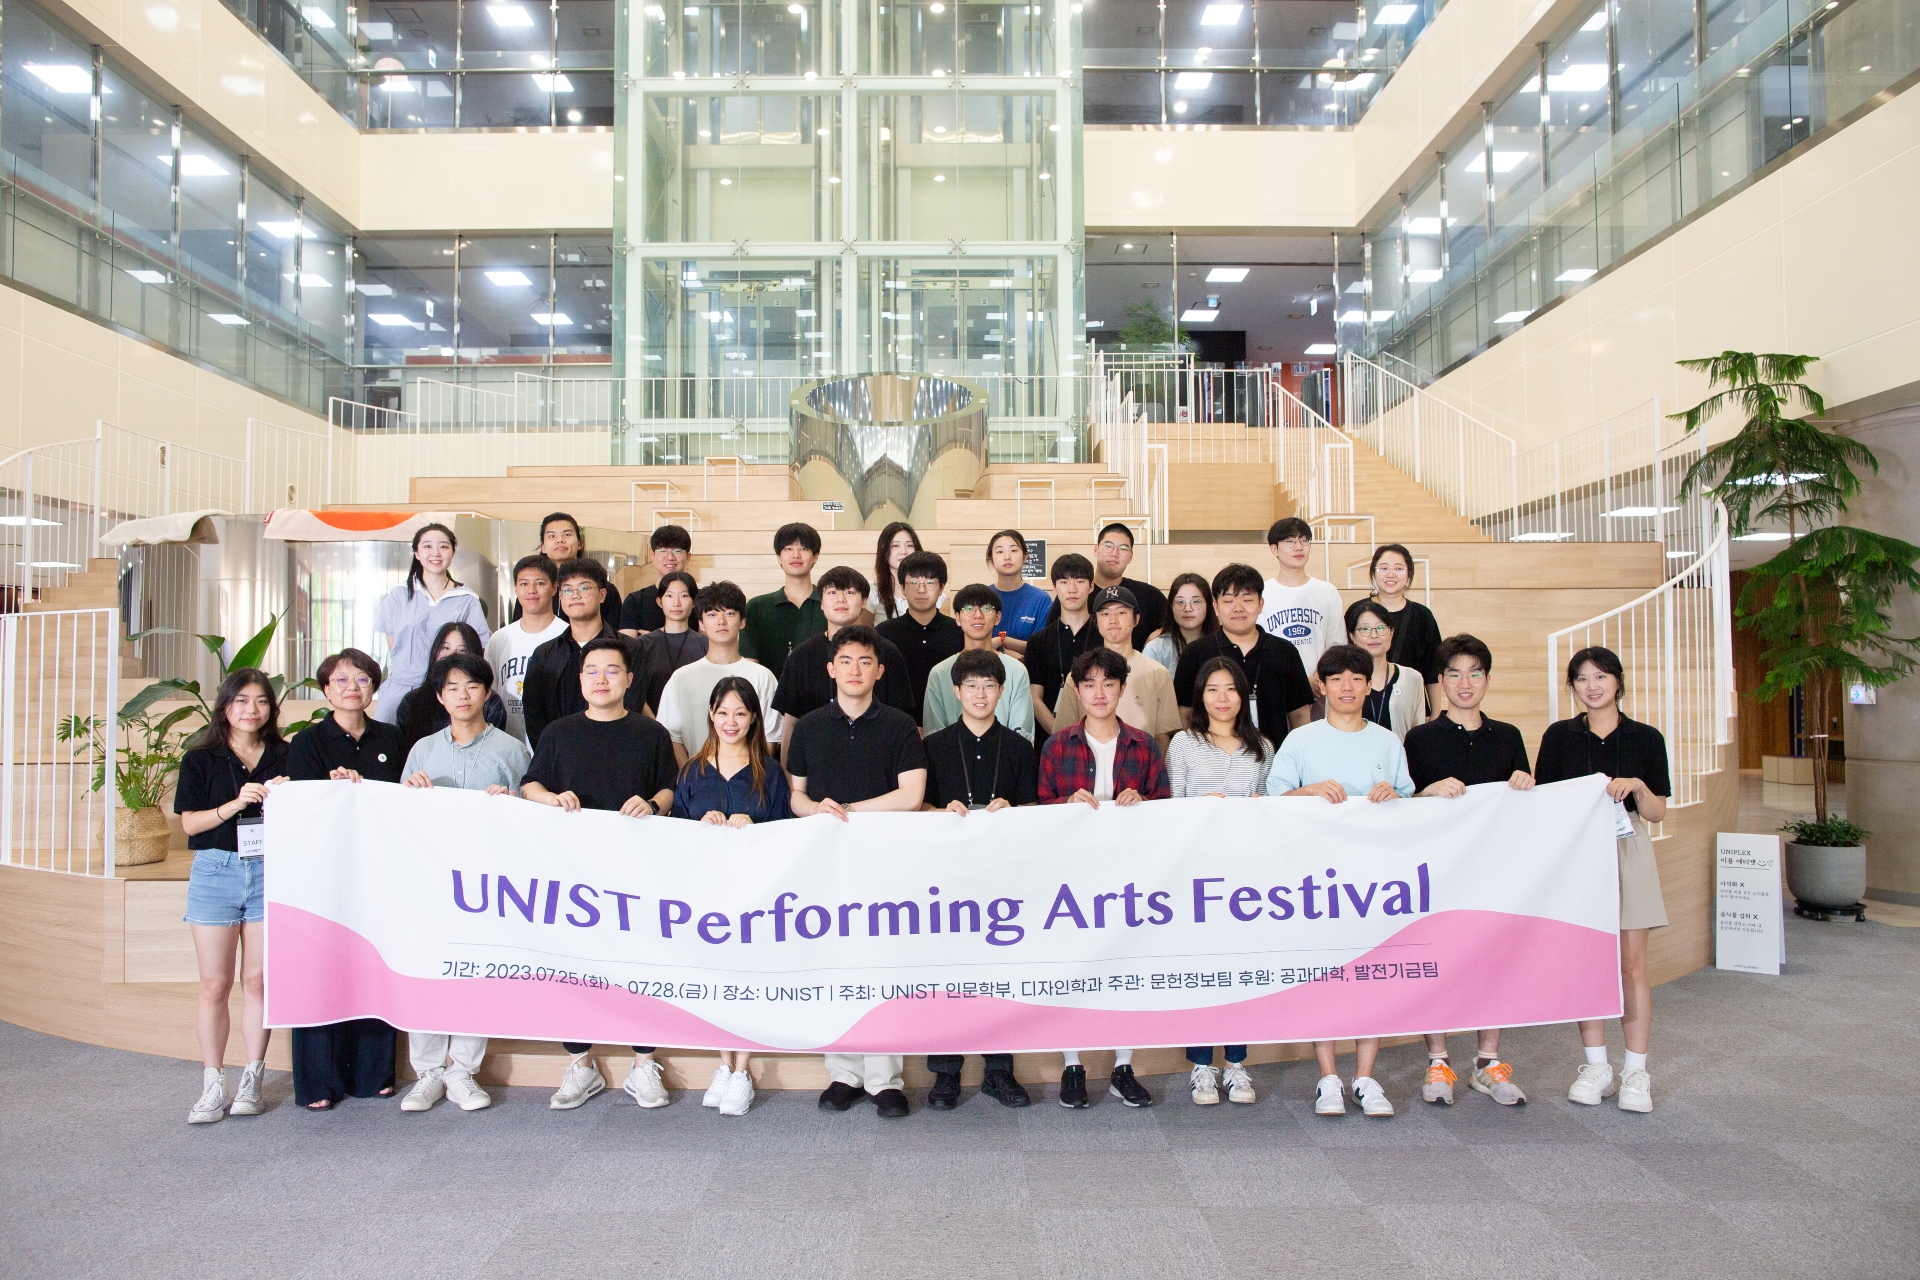 A total of 27 students will participate in this enriching experience, including 22 students from UNIST, KAIST, POSTECH, and GIST, along with 5 talented students from the School of Music within the College of Arts at University of Ulsan. 